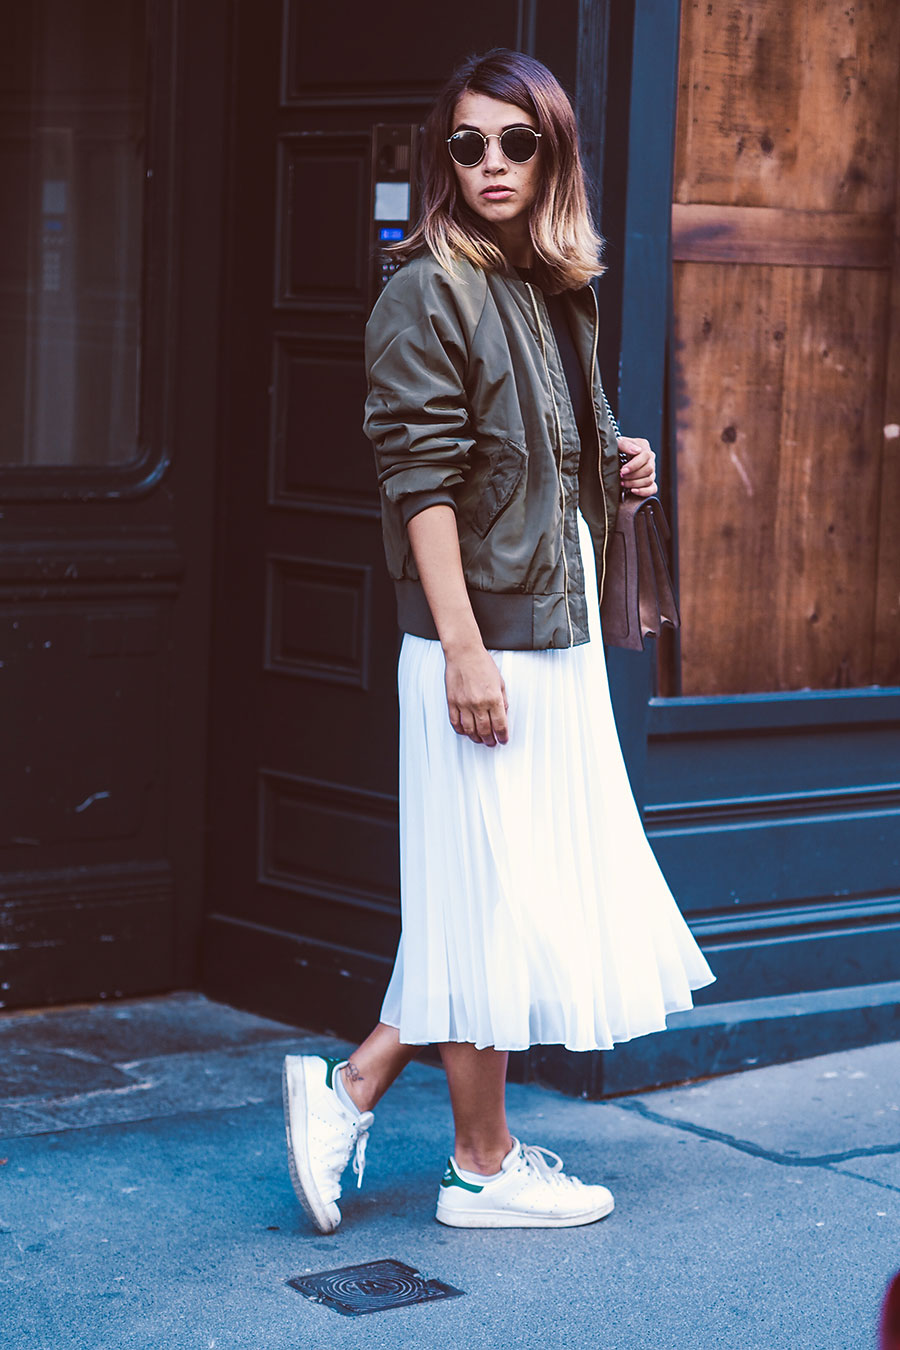 Bomber Jacket and a pleated skirt